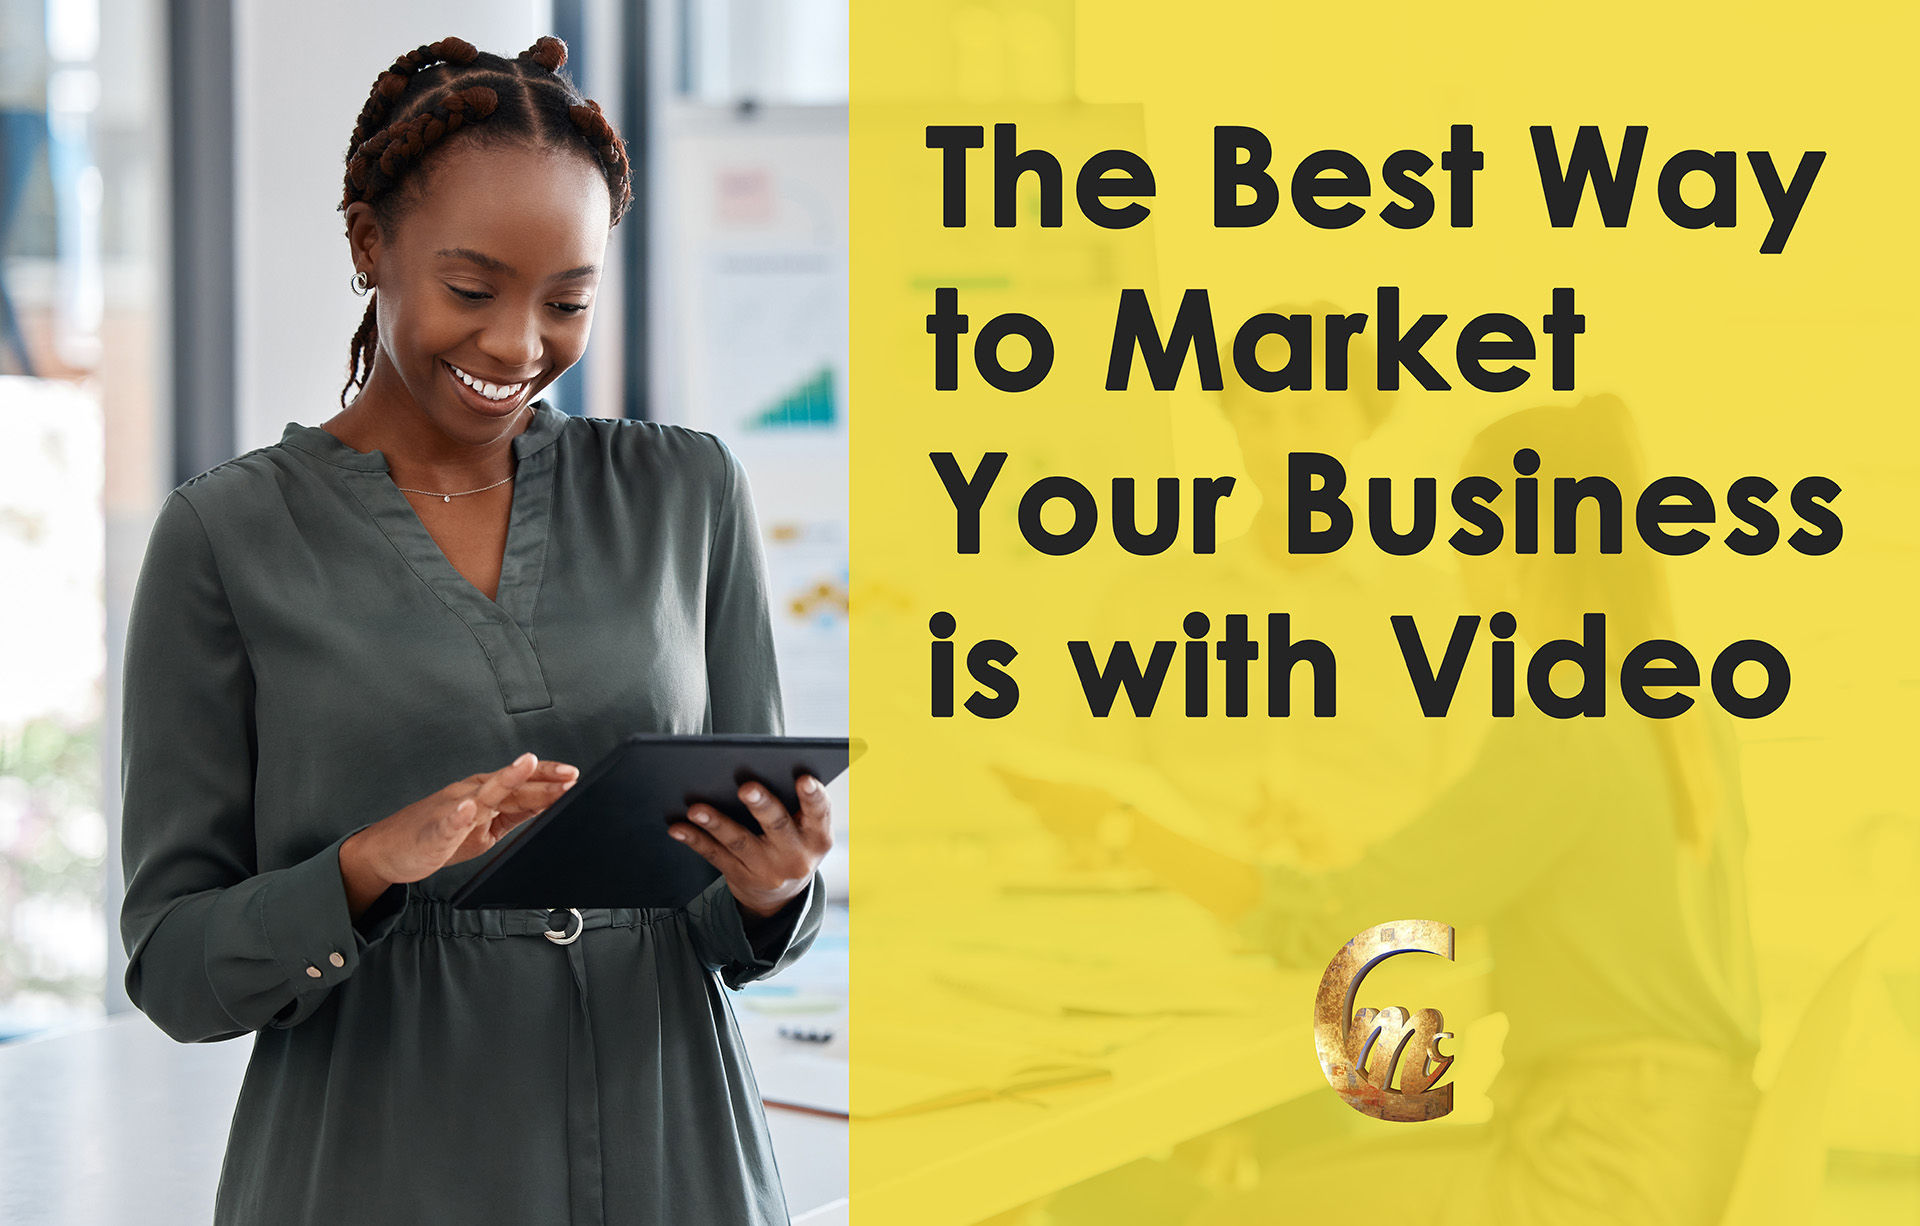 The Best Way to Market Your Business is with Video